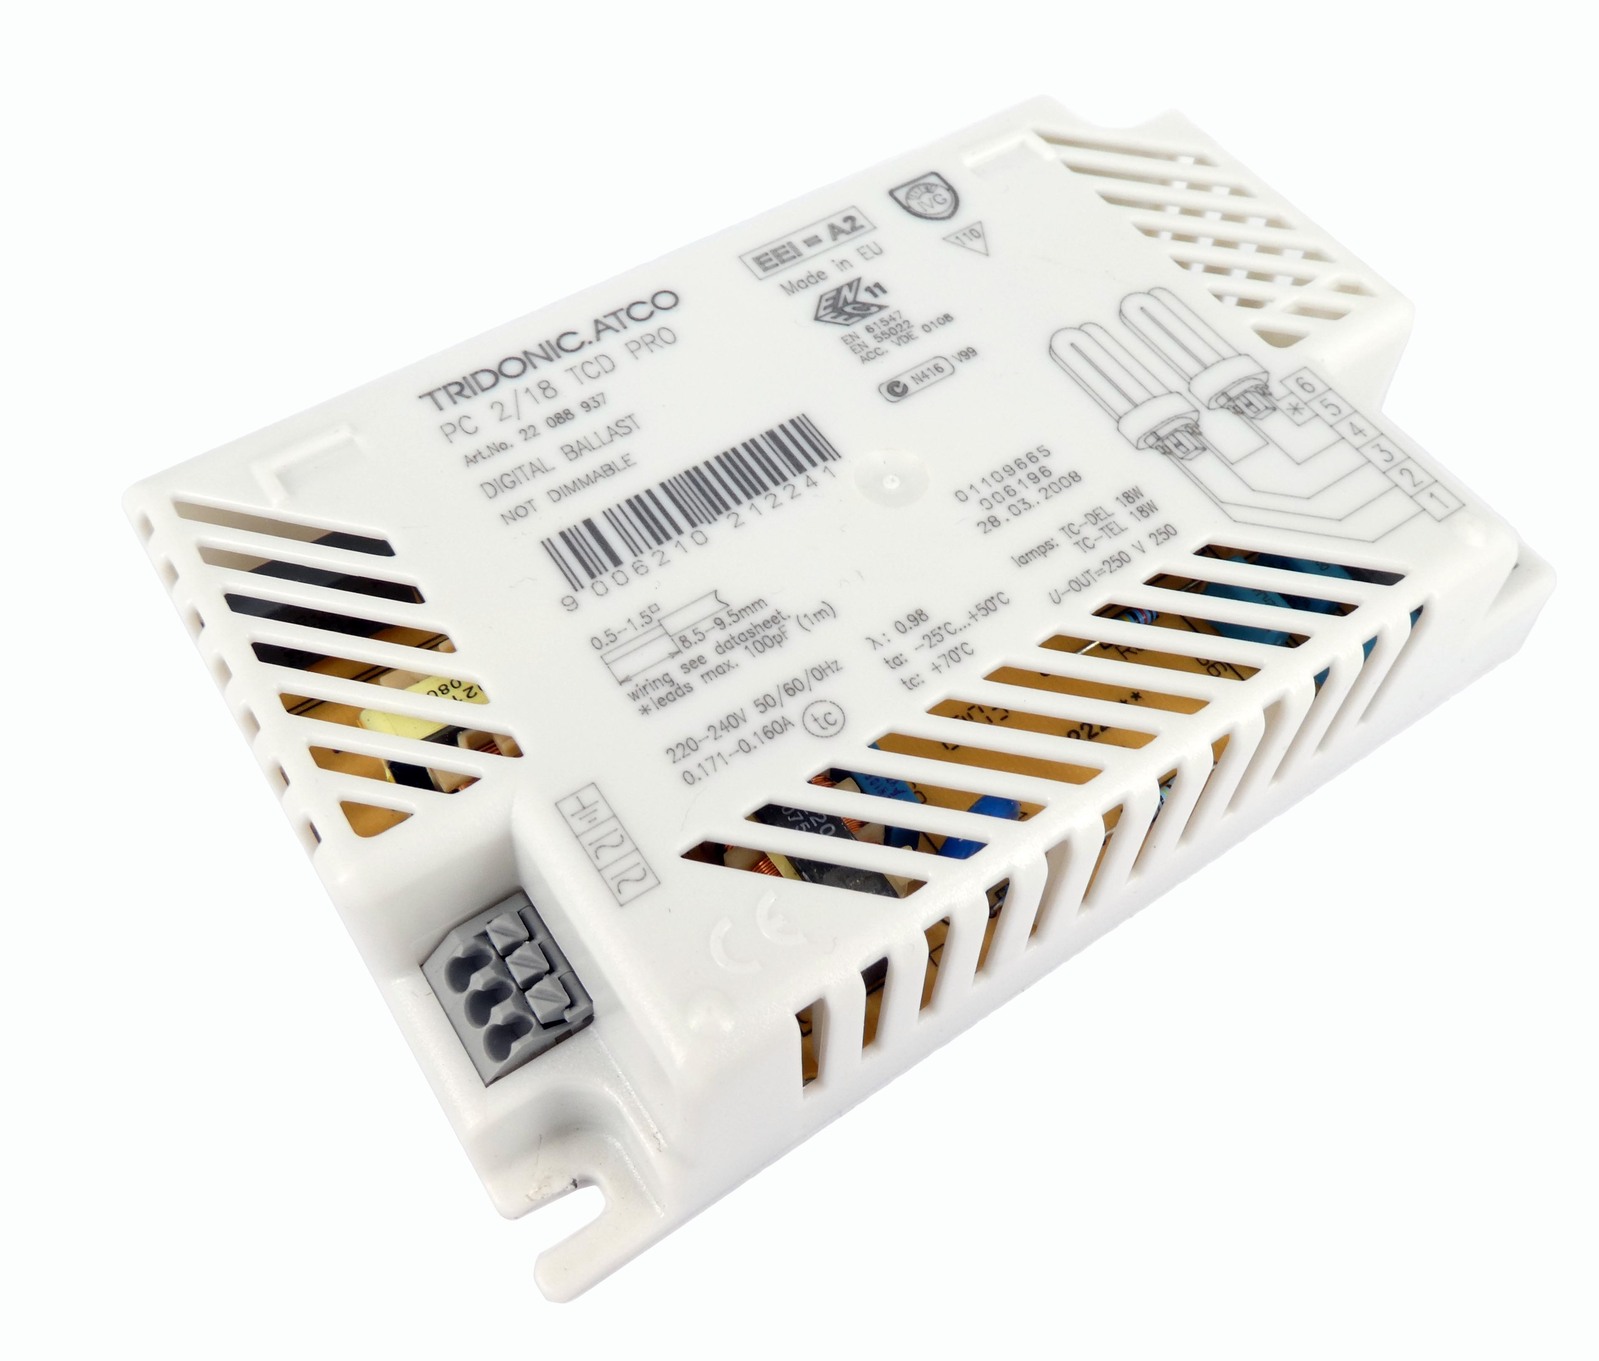 Tridonic PC 2 X 18 TCD Pro Digital Electronic Ballast Not Dimmable for sale online 